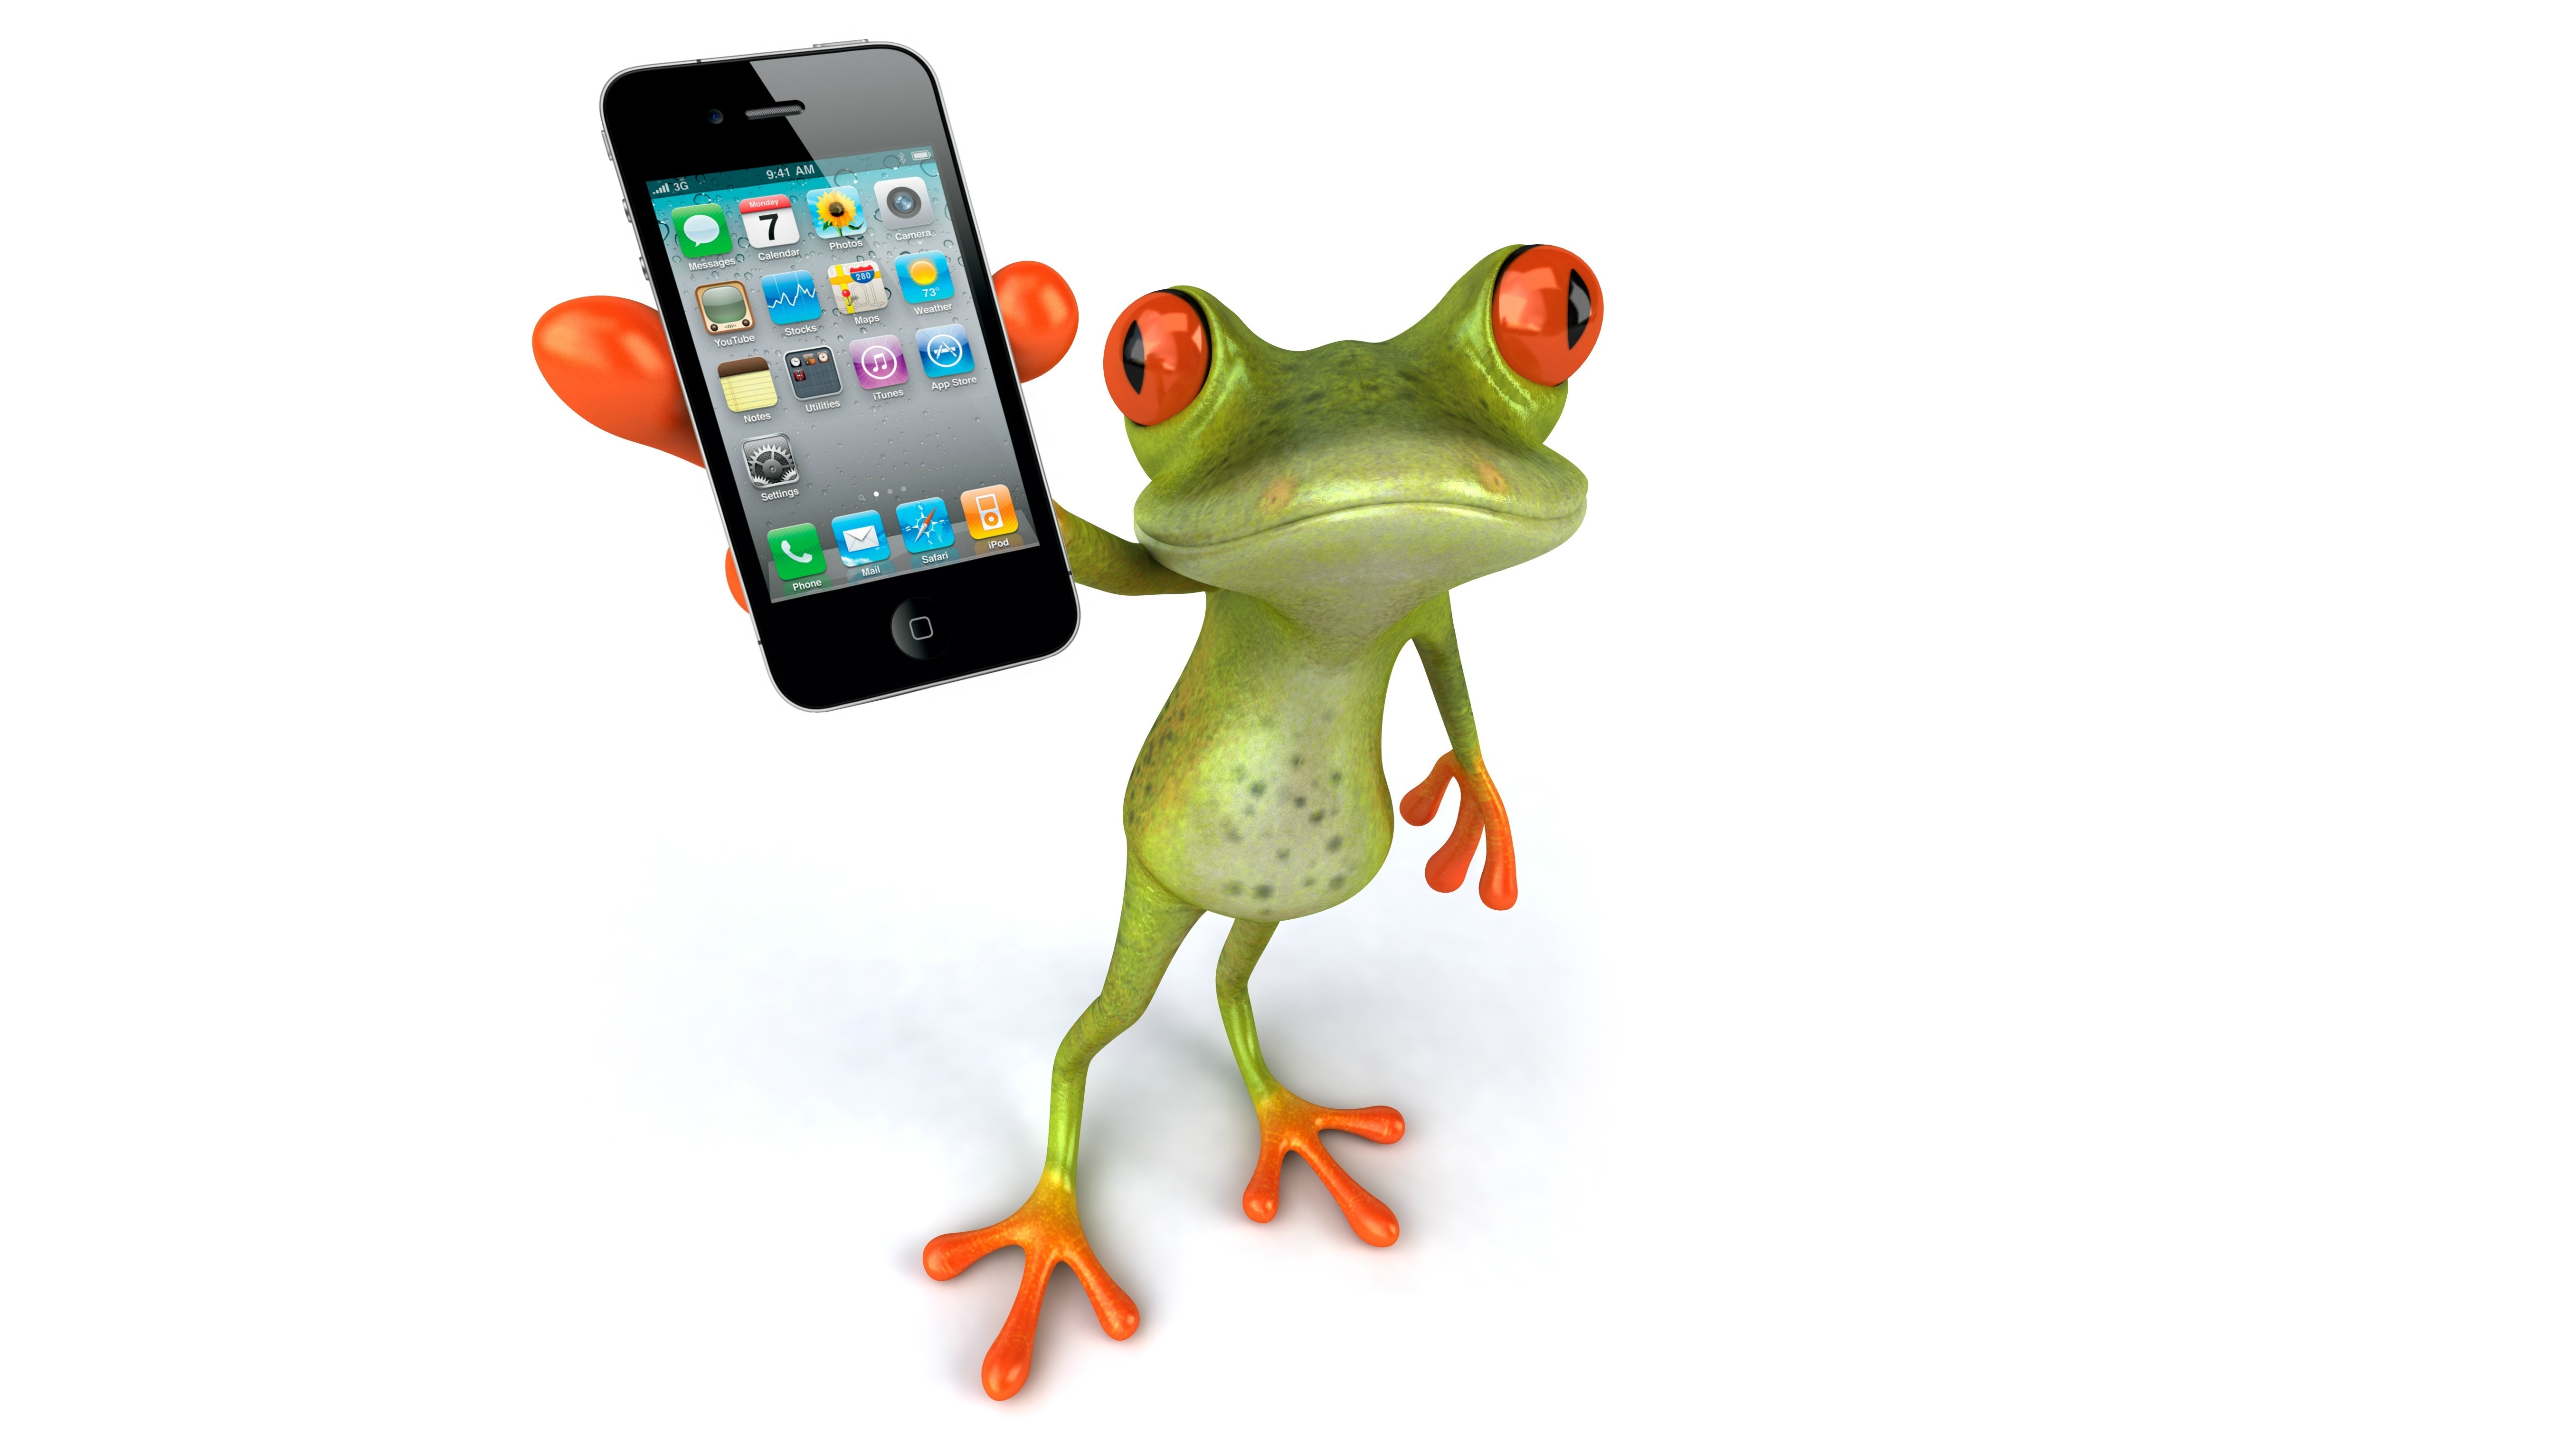 Frog 3d Graphics Mobile Phone iPhone 4s Wallpaper